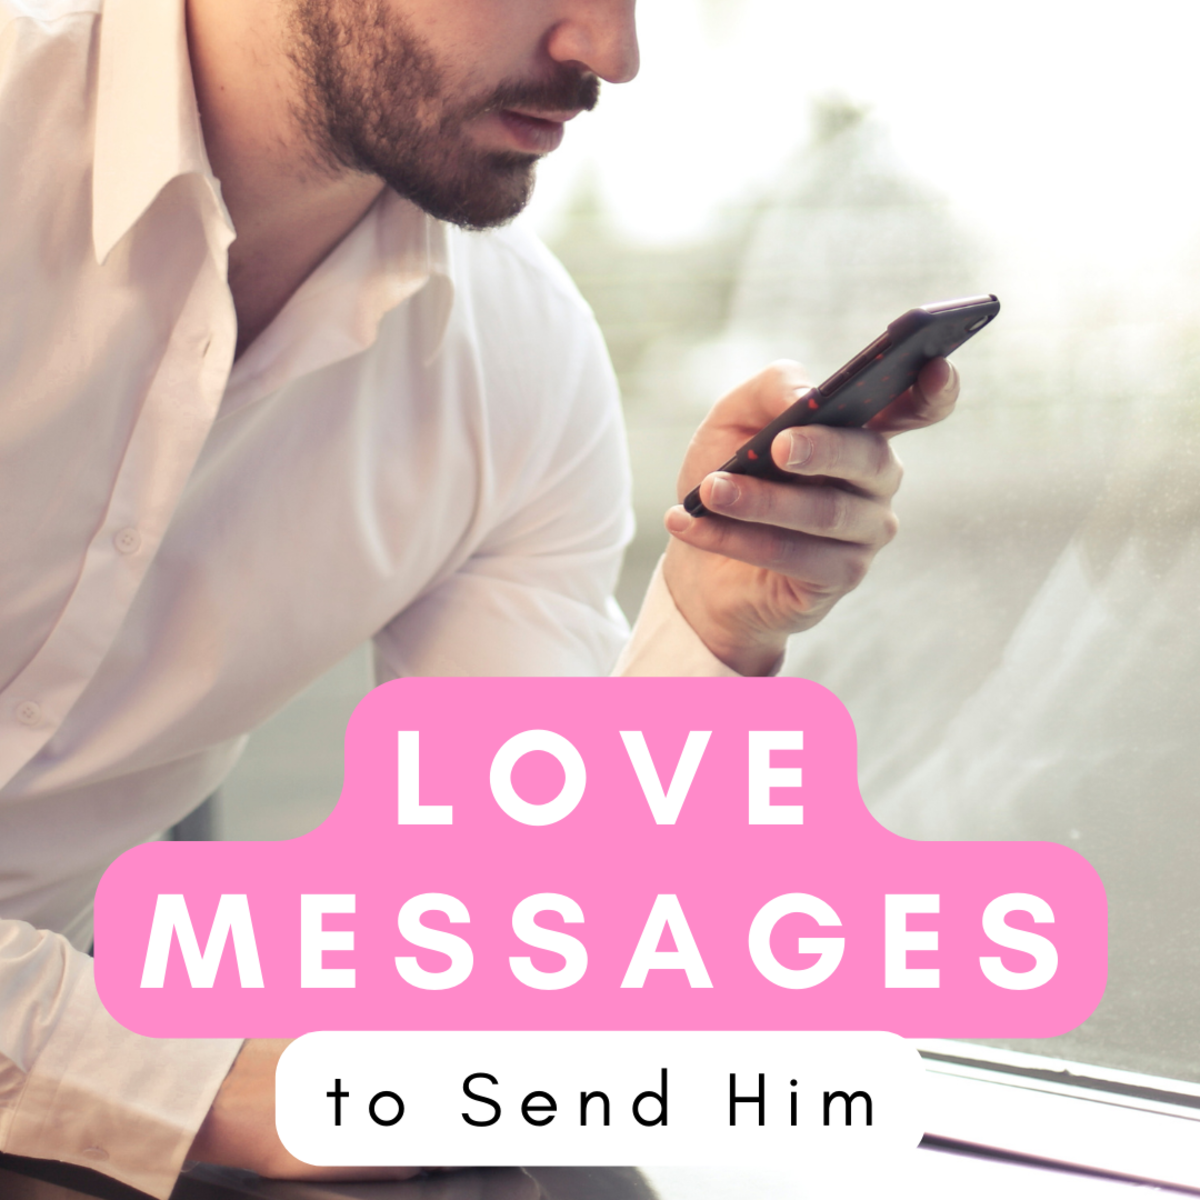 Love Quotes, Texts, Paragraphs, and Messages for Him